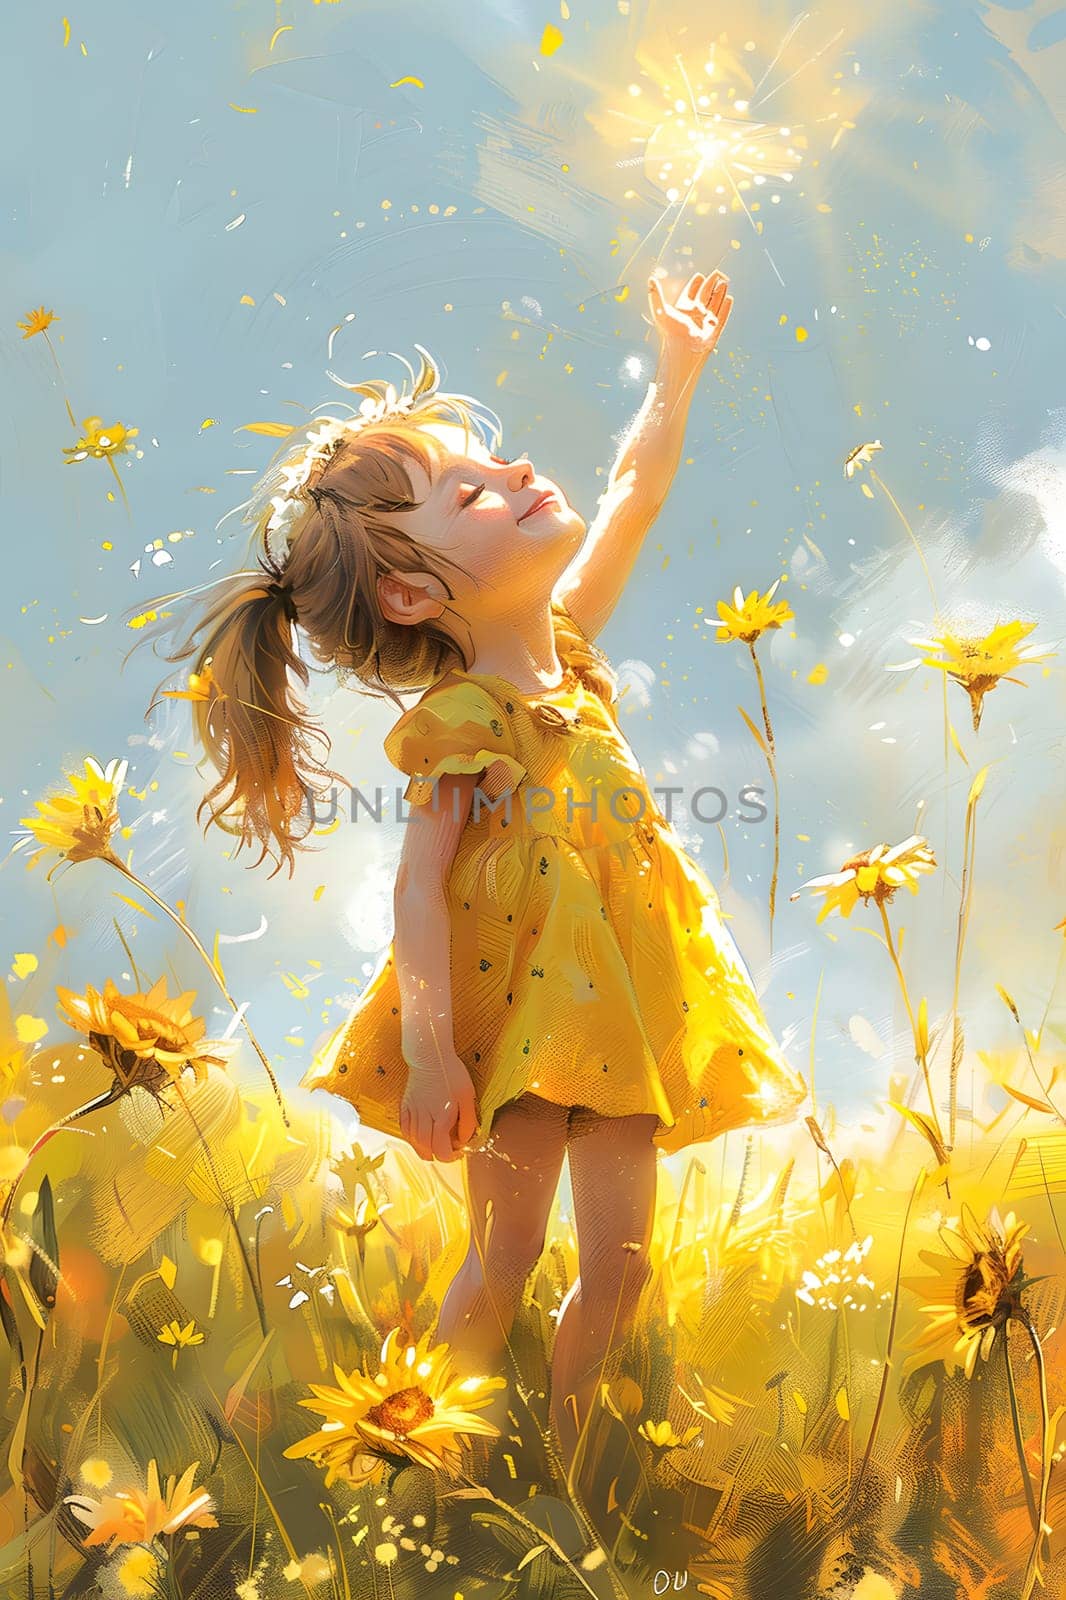 A toddler in a sunny yellow dress is playing in a meadow of yellow flowers, her smile radiating happiness as she enjoys the beauty of nature